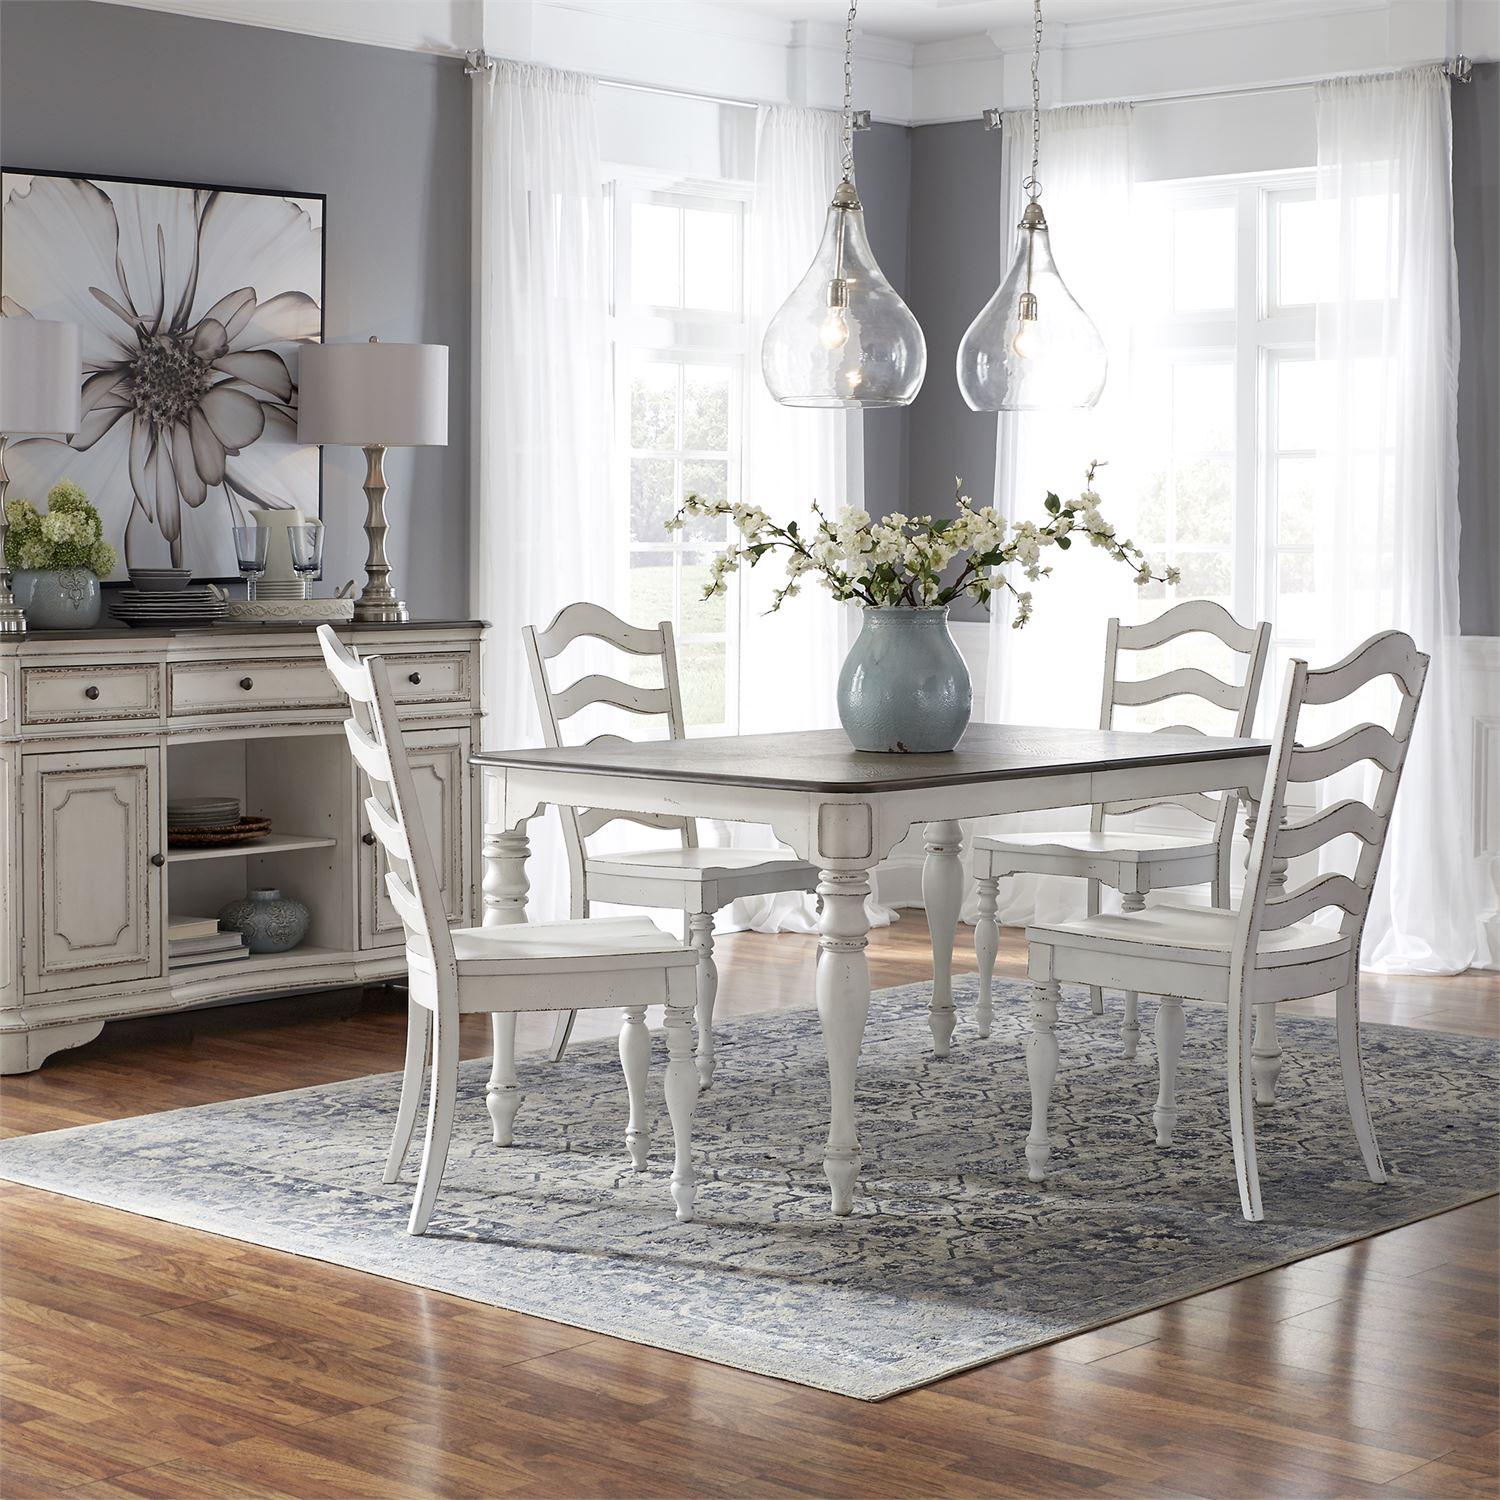 European Traditional Dining Table Set Magnolia Manor  (244-CD) Dining Room Set 244-CD-5LTS in White 